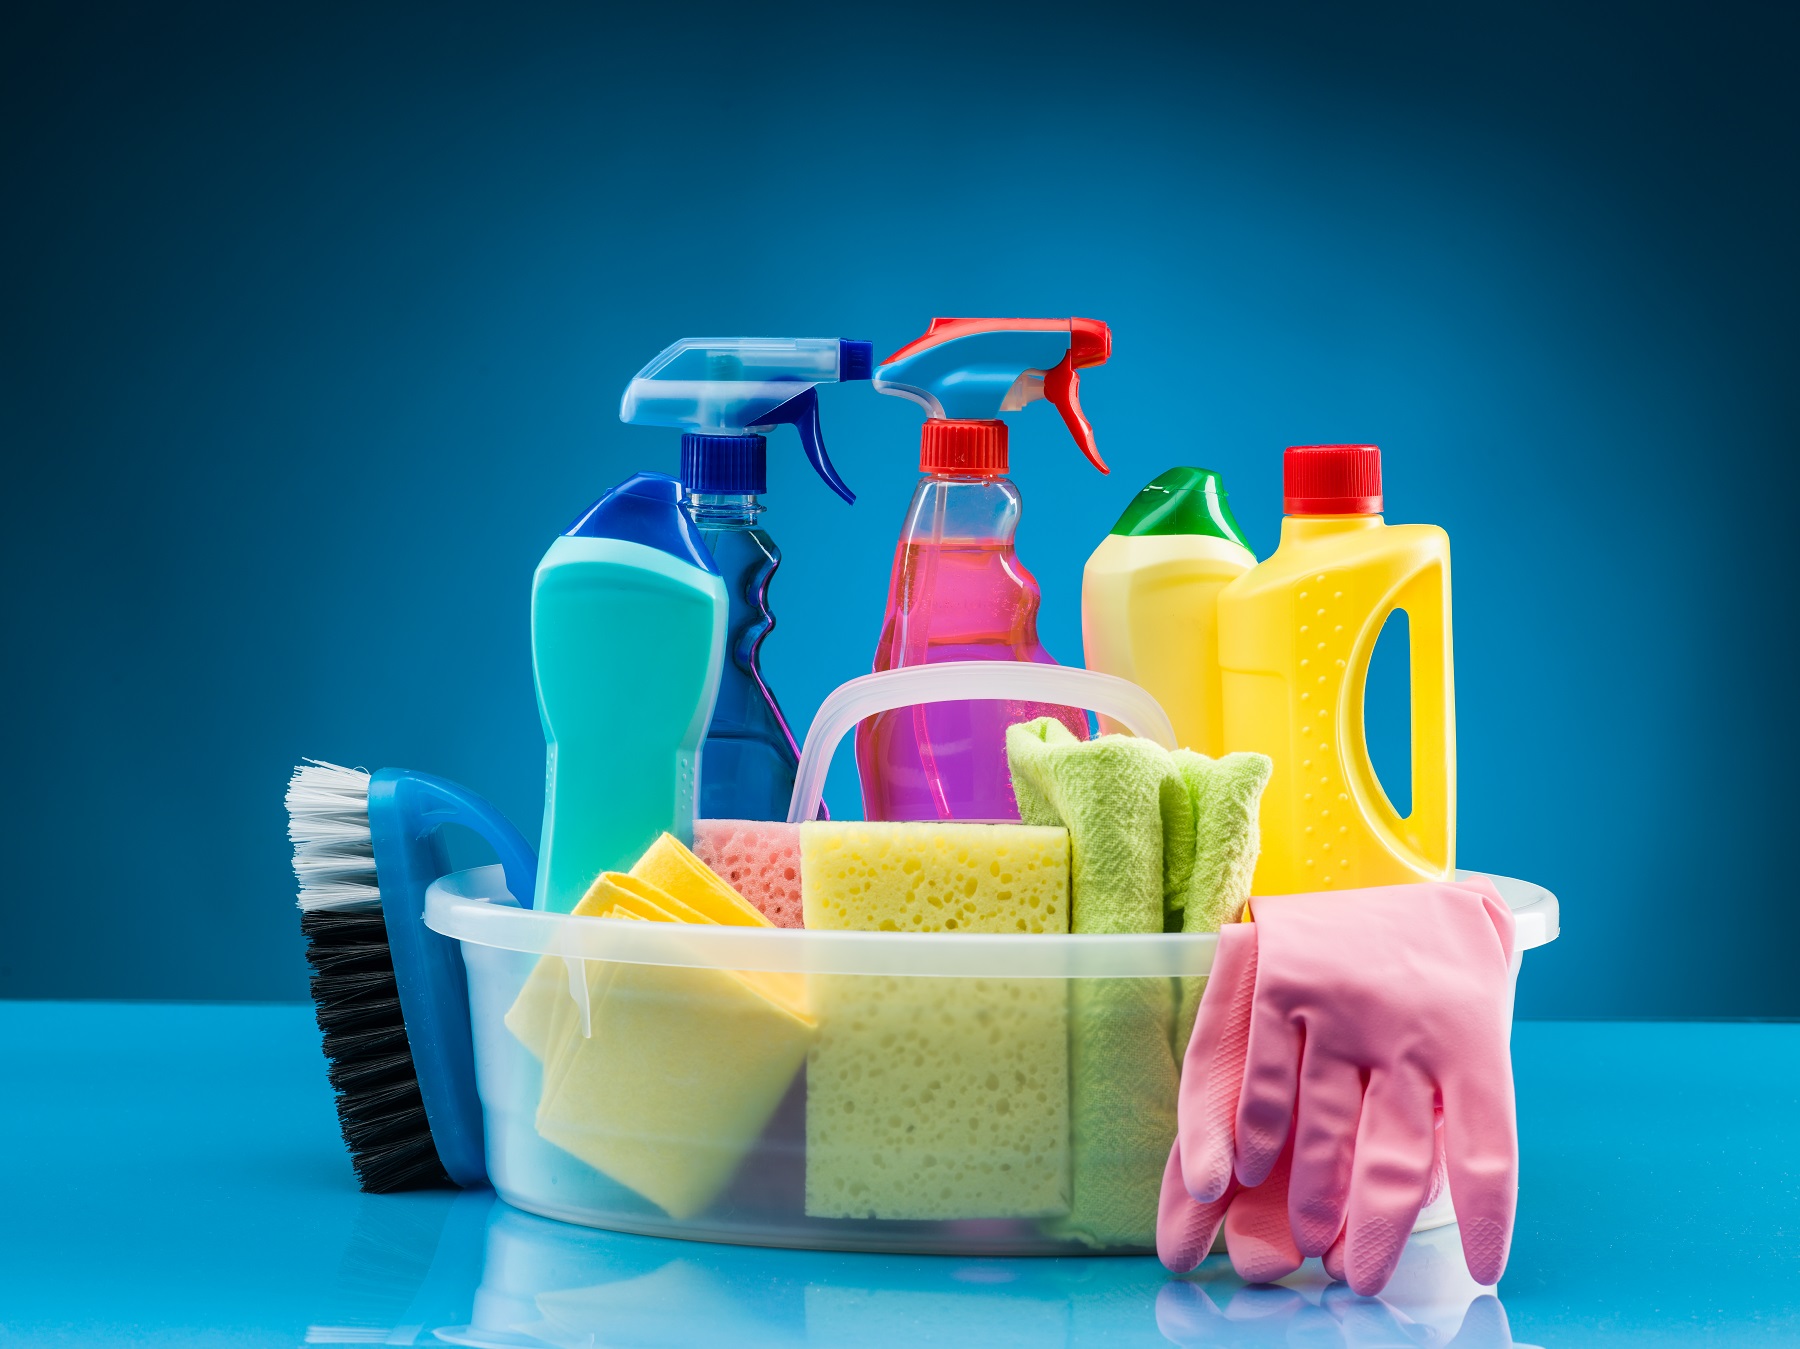 https://www.thurstontalk.com/wp-content/uploads/2021/04/Safe-cleaning-products-wet-center-thurston-county-health-1.jpg